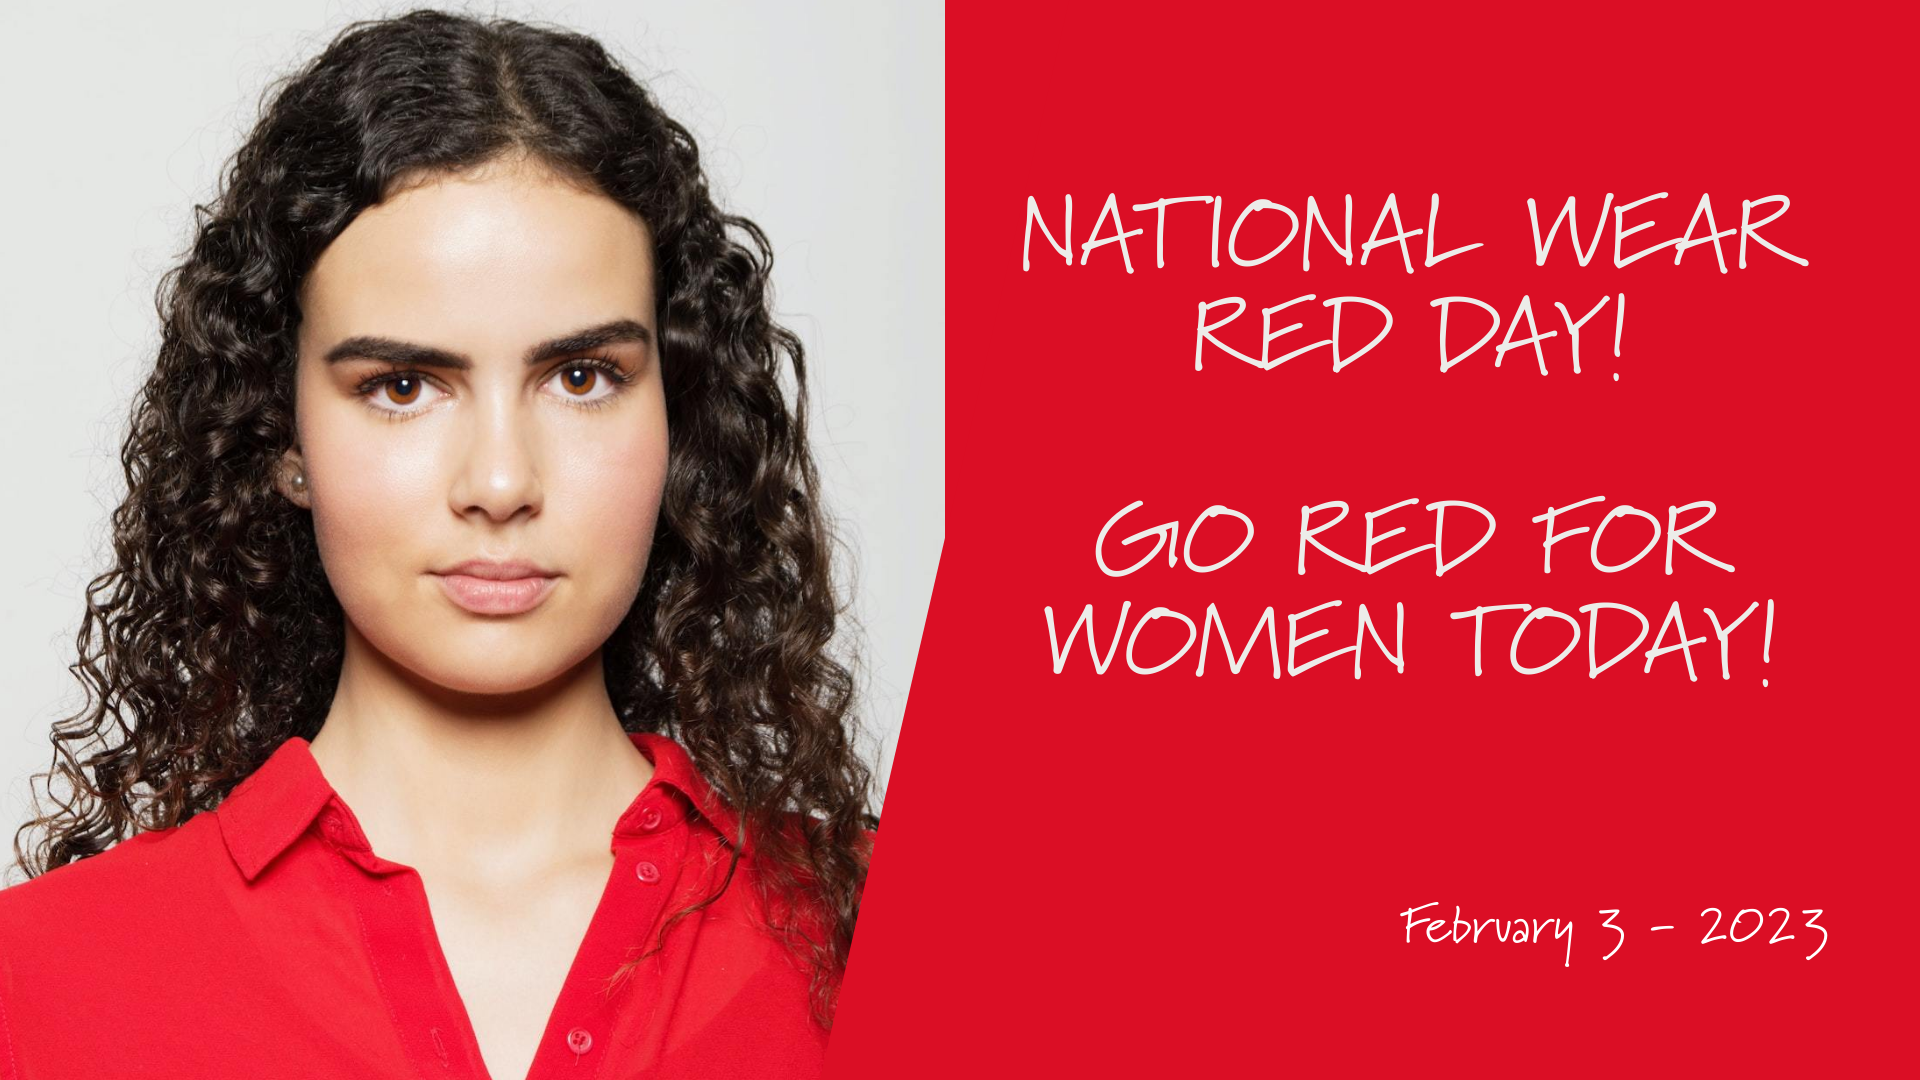 National Wear Red Day February 32023!Go Red For Women